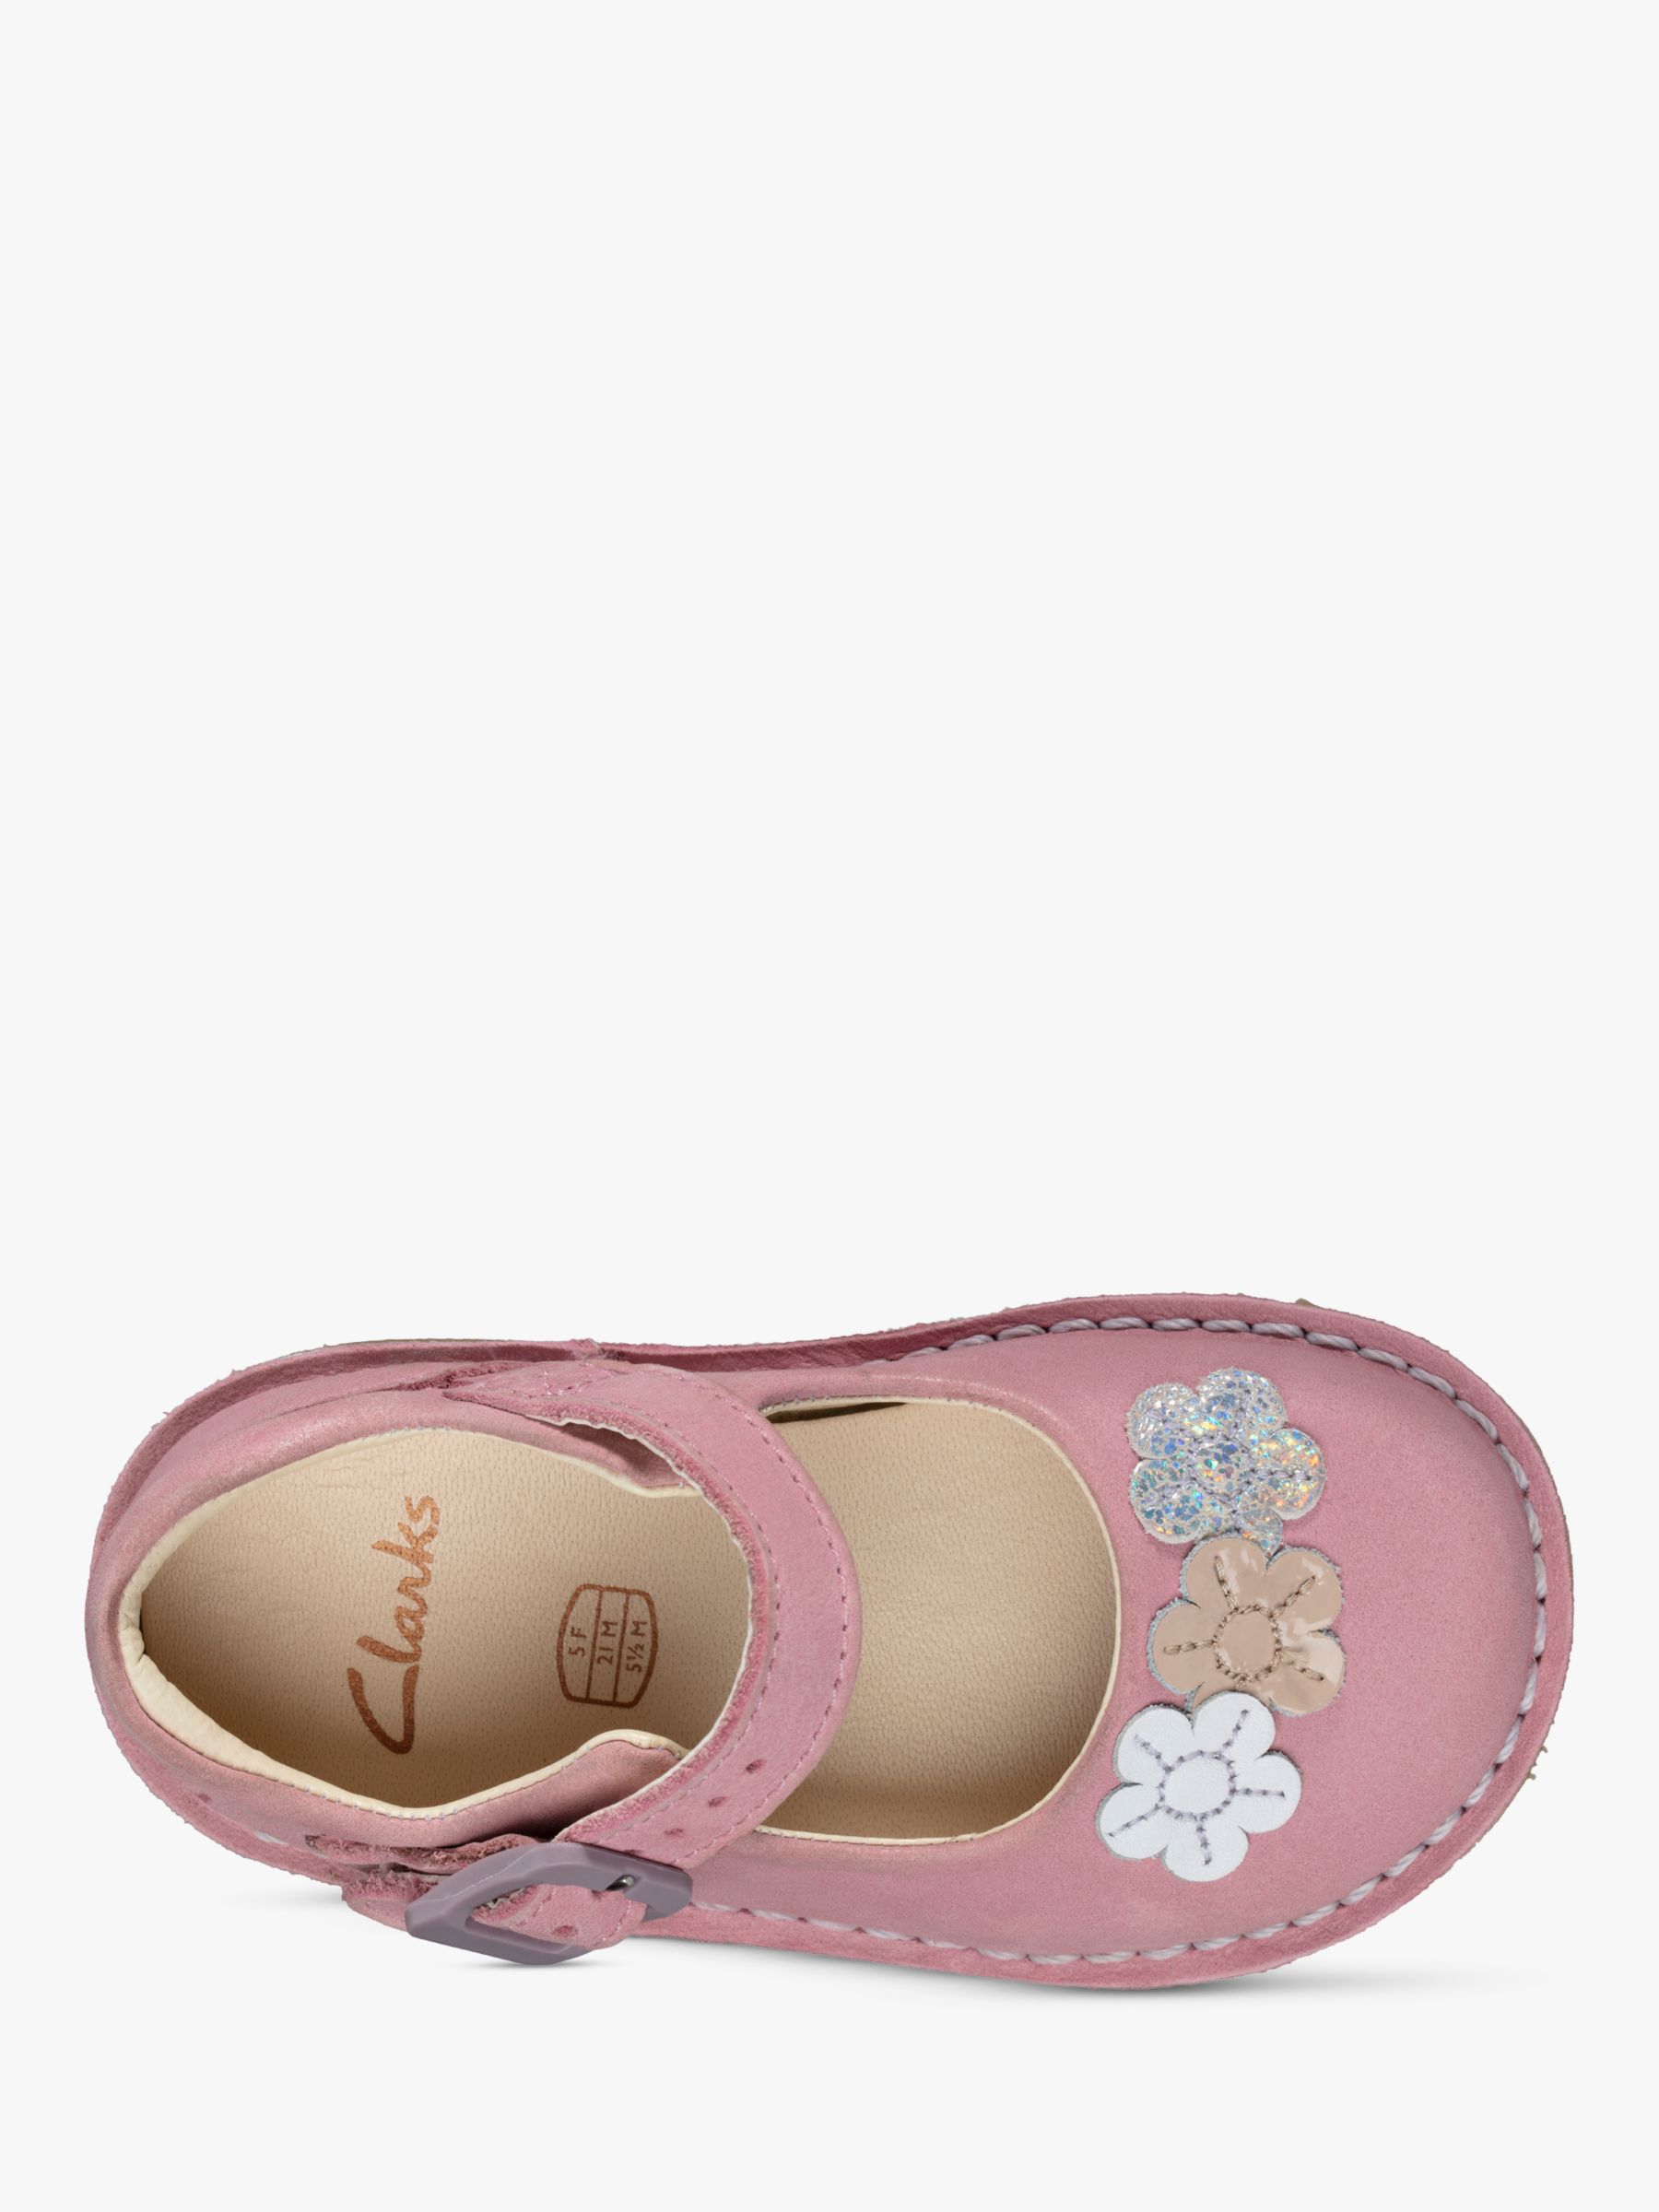 clarks soft sole baby shoes